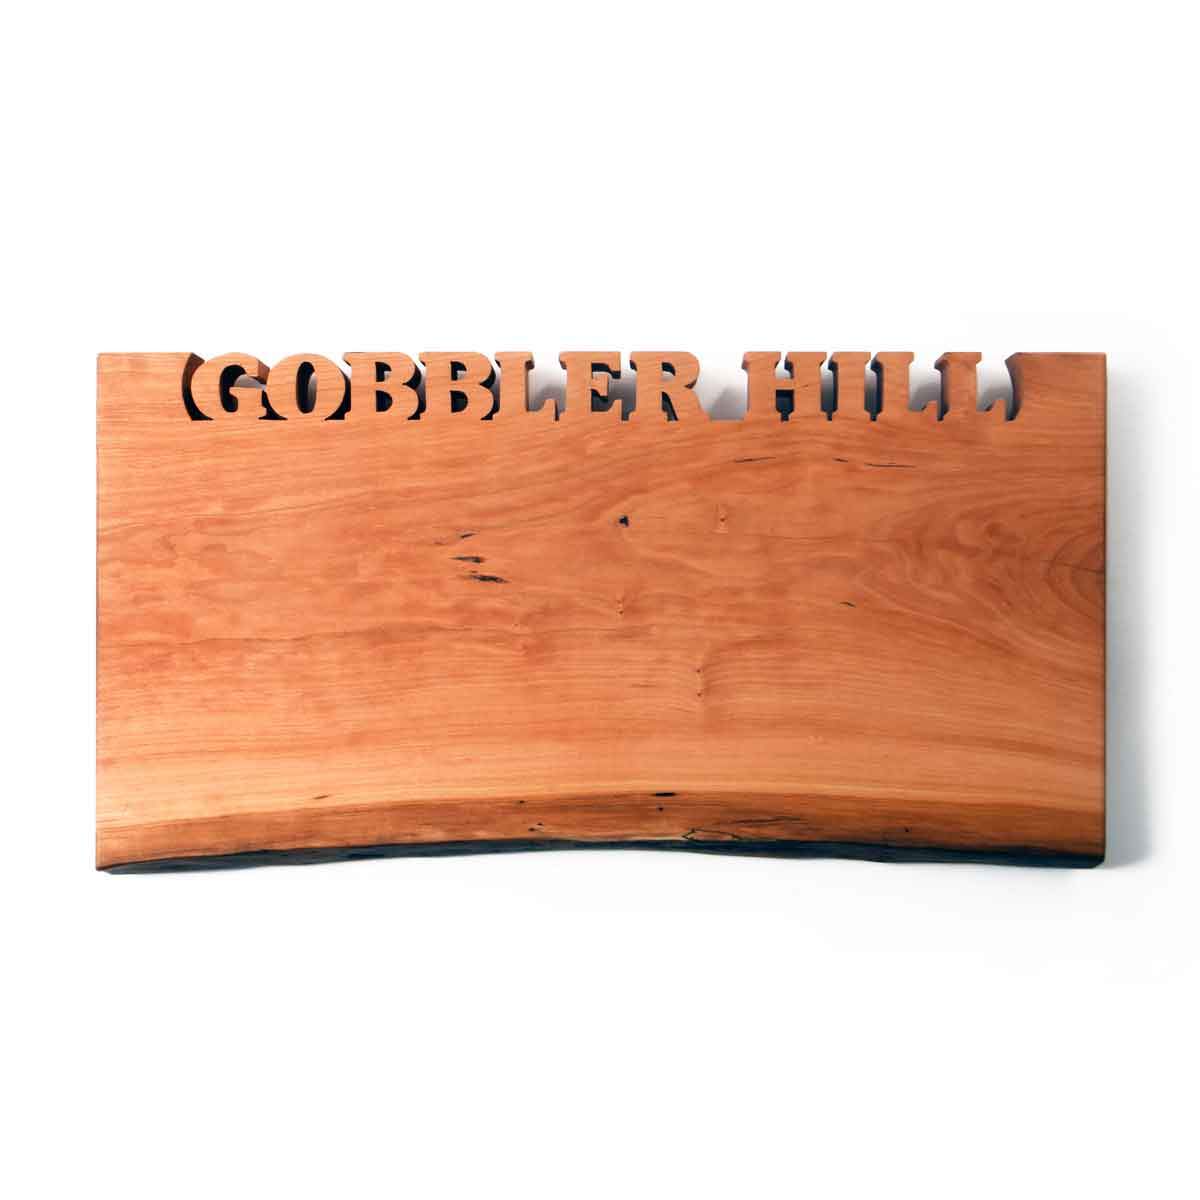 Wooden Chopping Boards  Personalized Wood Cutting Boards - woodgeekstore